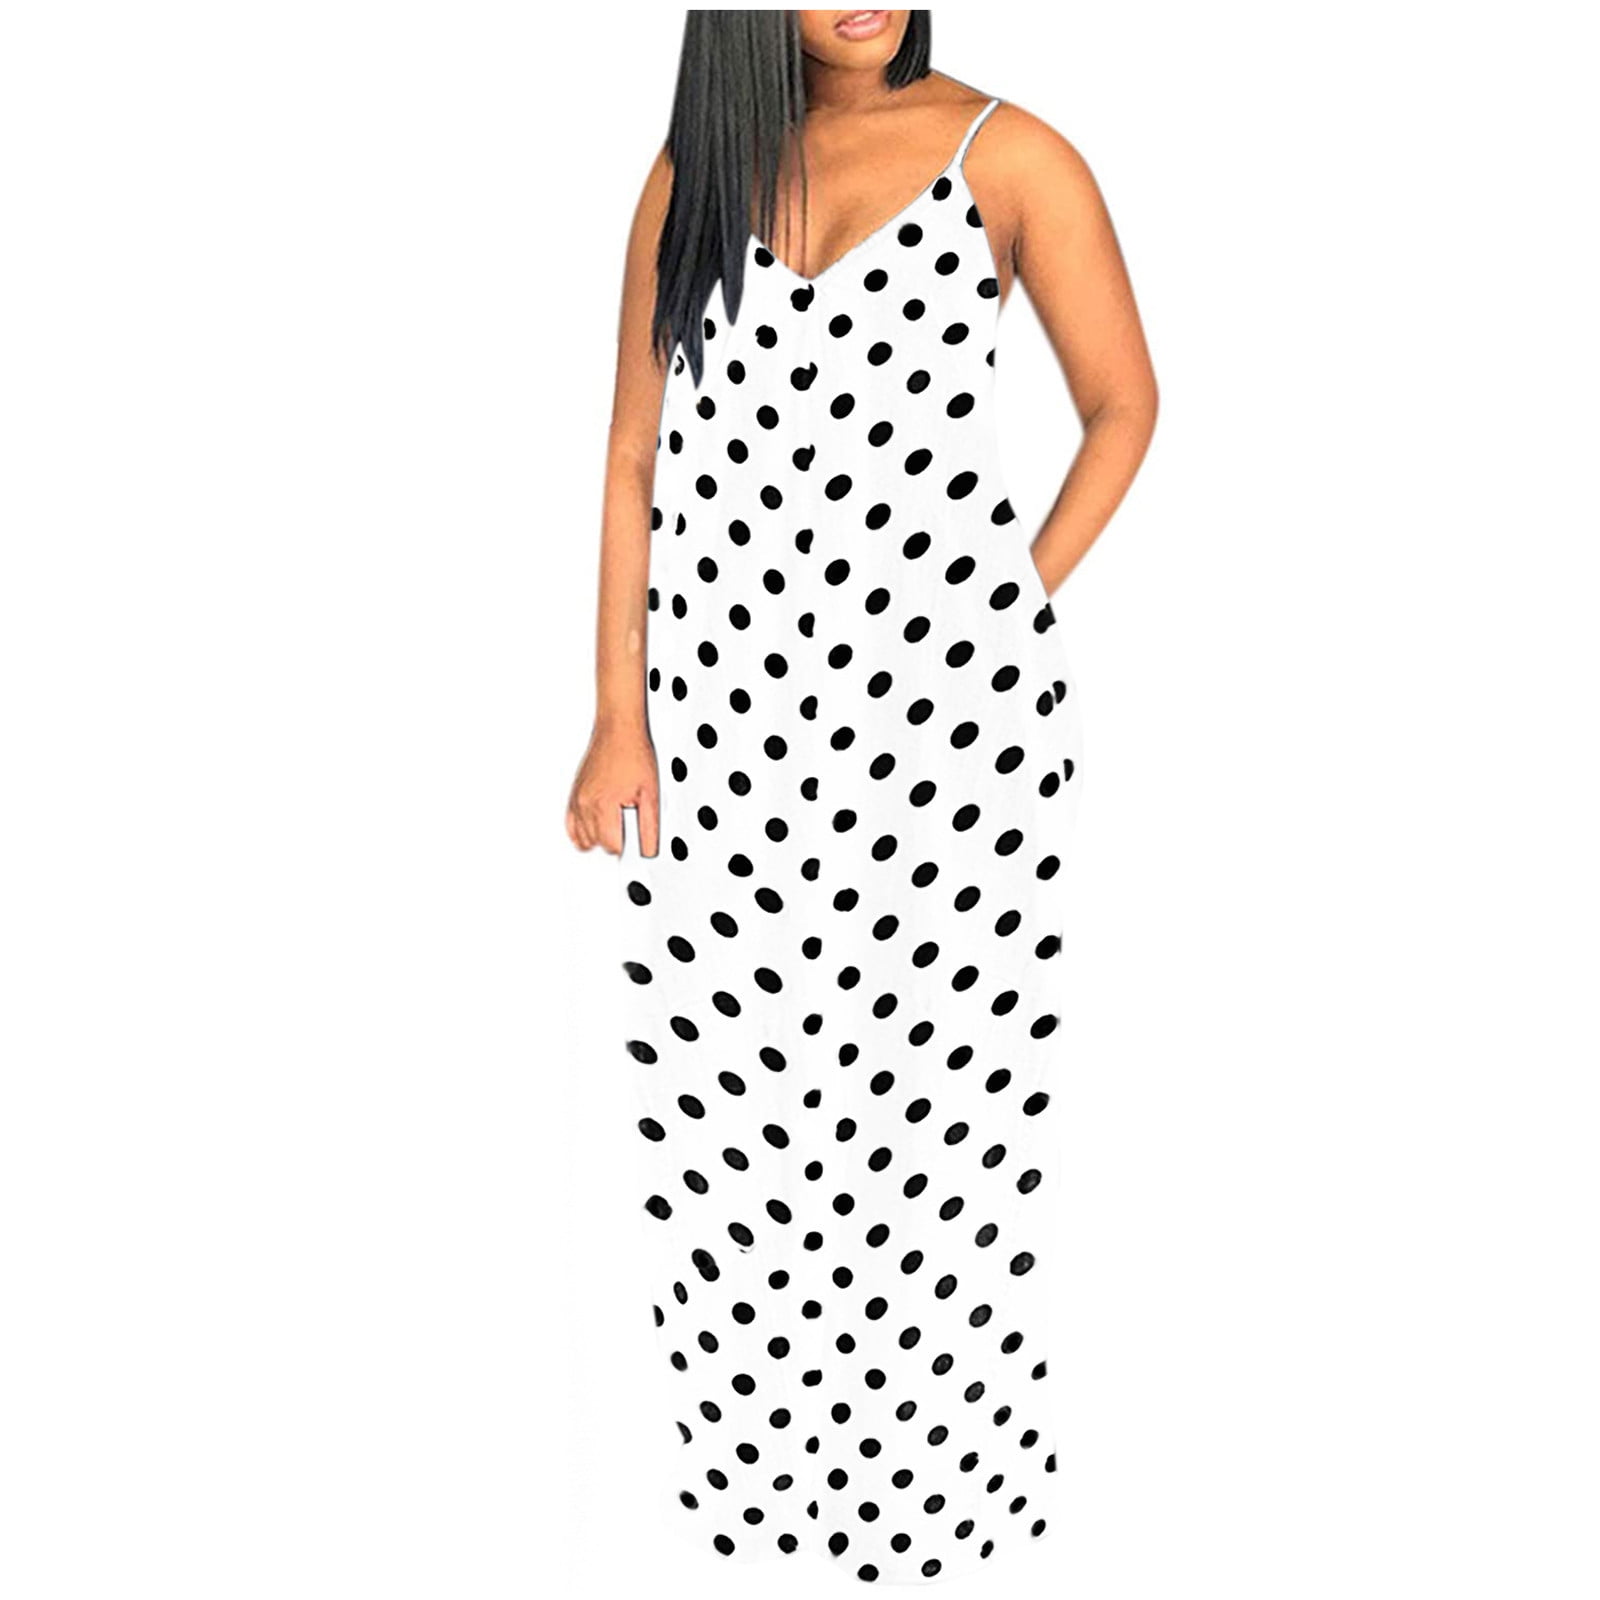 Women's Summer T Shirt Maxi Dress Batwing Sleeve,Items Under 1 Dollar,Lightning  Sales Today Deals,Prime Member Deals only,clearence Items,Warehouse Sale  and Deals Clearance